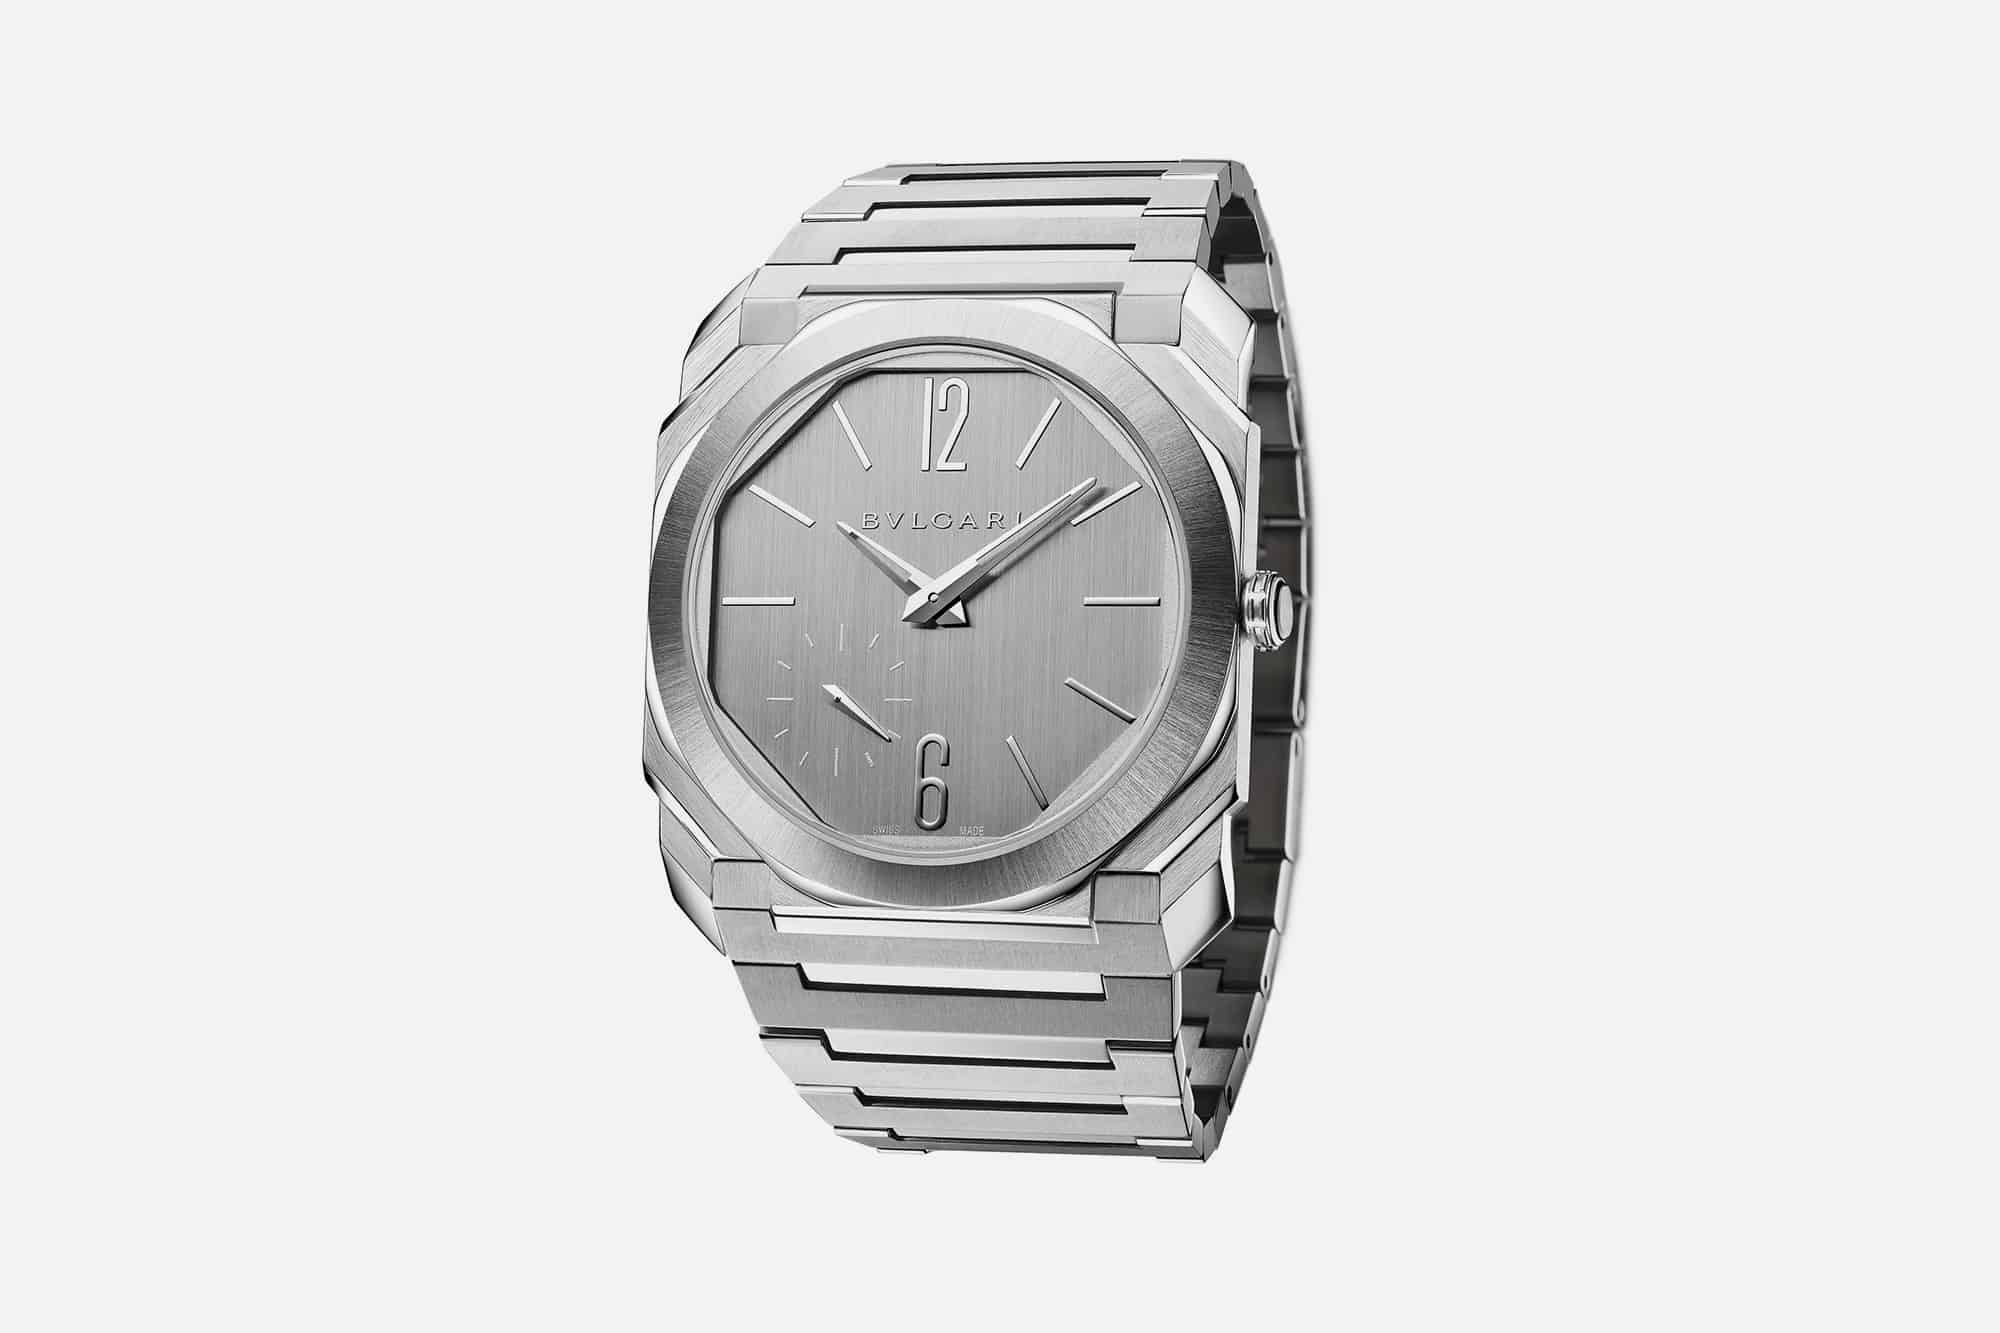 Bulgari Introduces a New Octo Finissimo with a Stunning Silvered Dial -  Worn & Wound